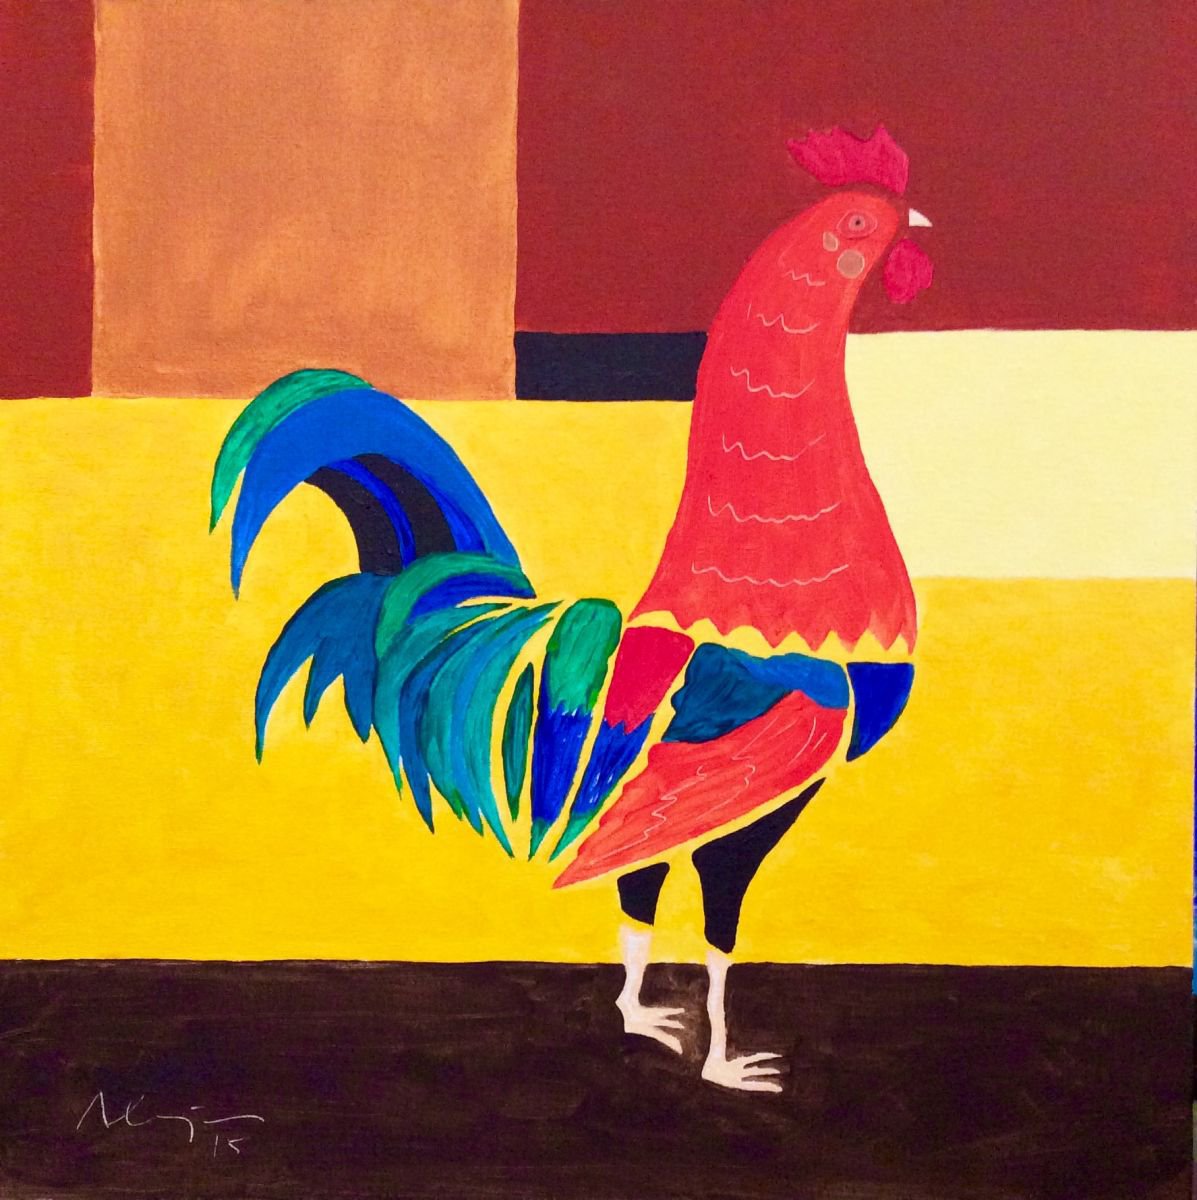 The rooster by Alejos